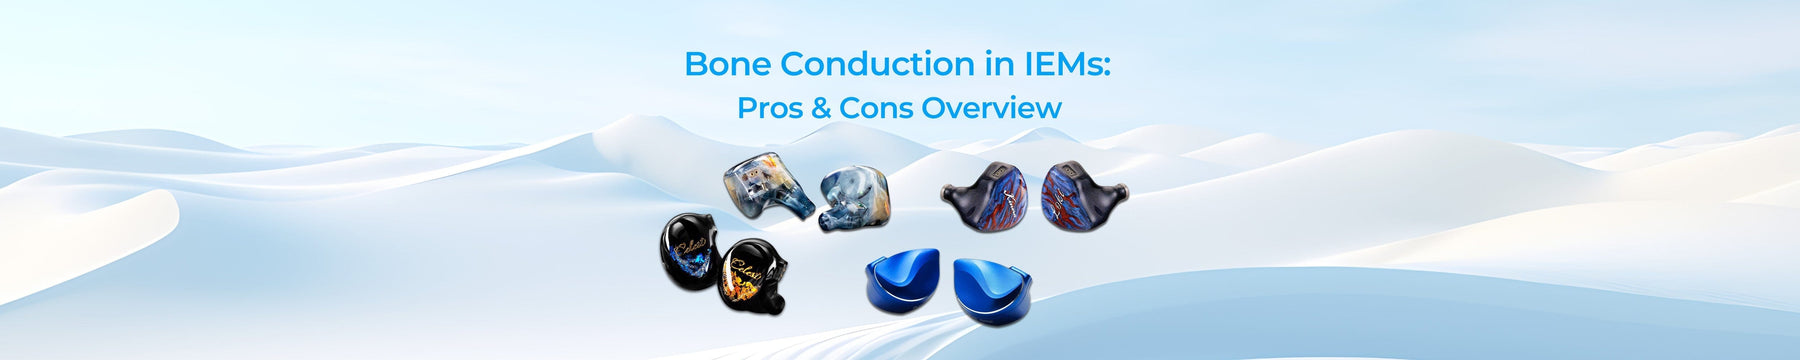 Bone Conduction in IEMs: Pros & Cons Overview